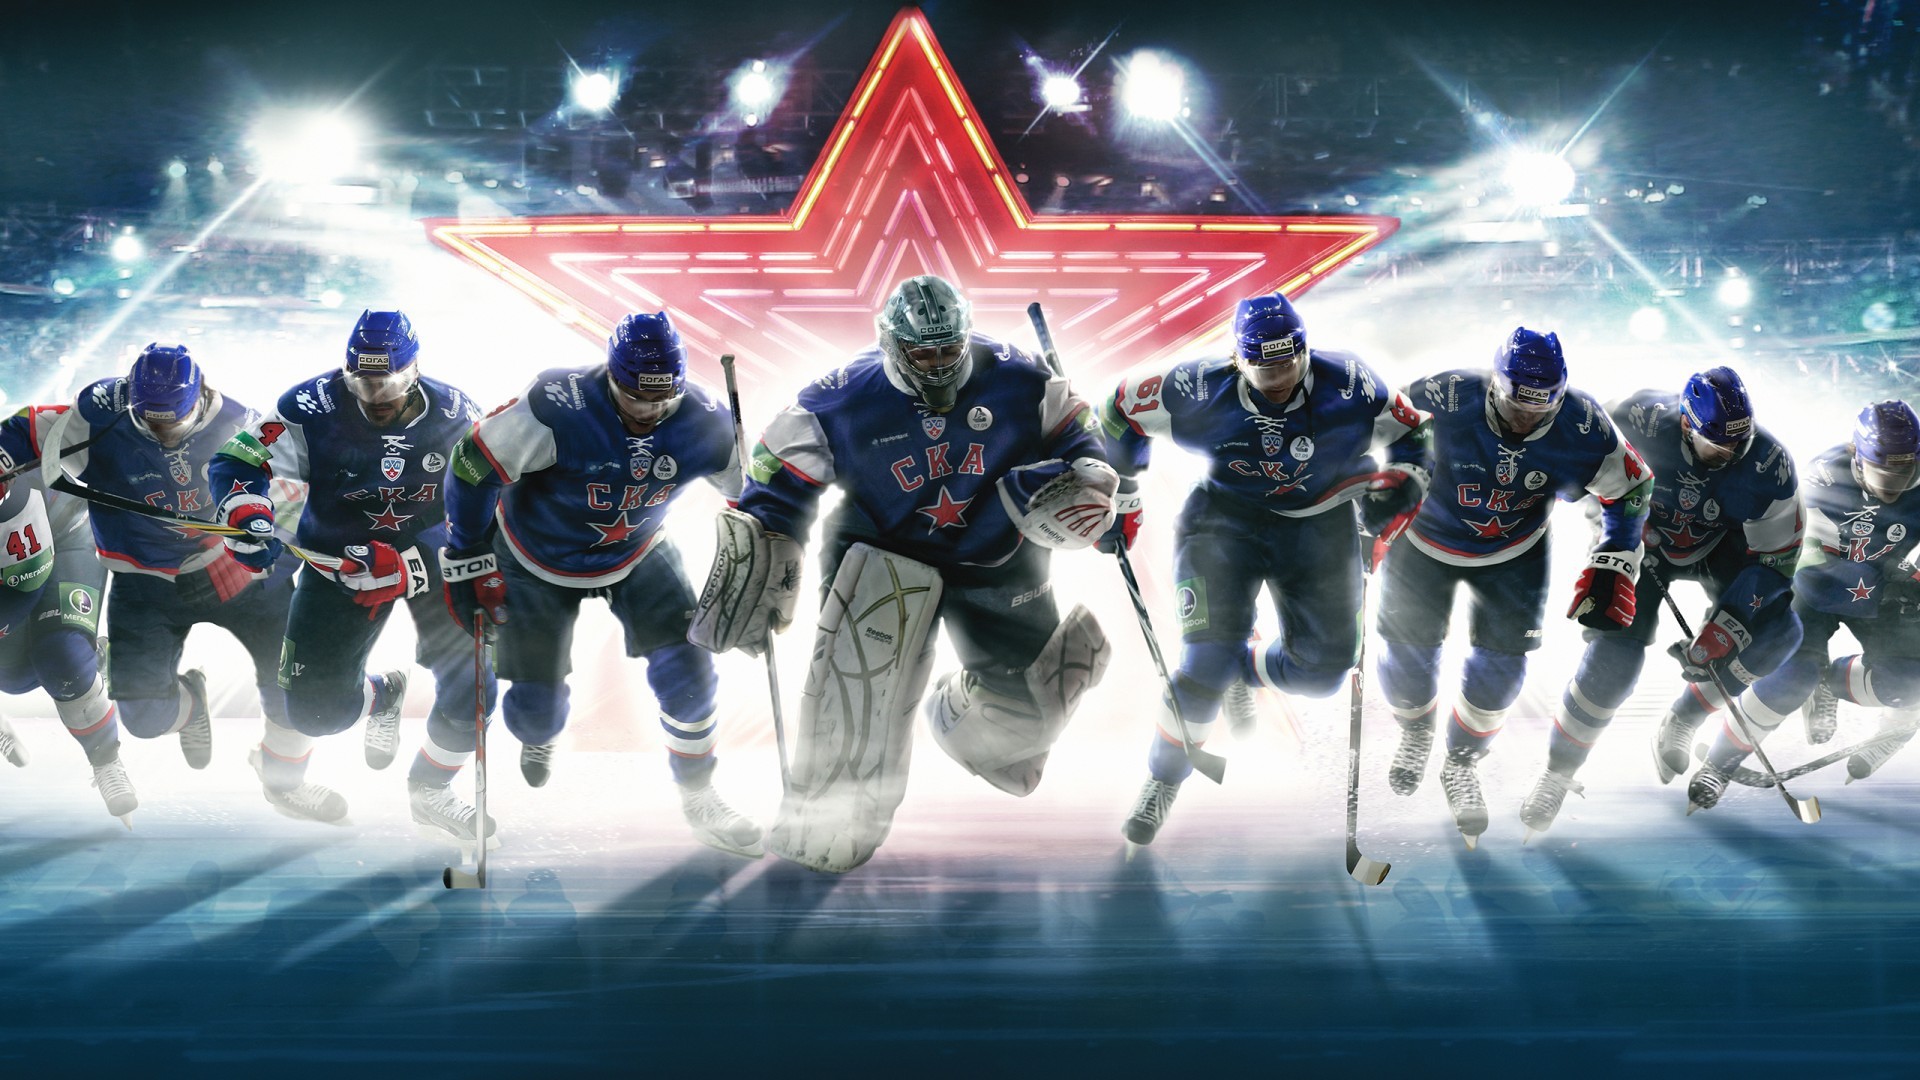 1920x1080 Hockey team wallpapers and images - wallpapers, pictures, photos